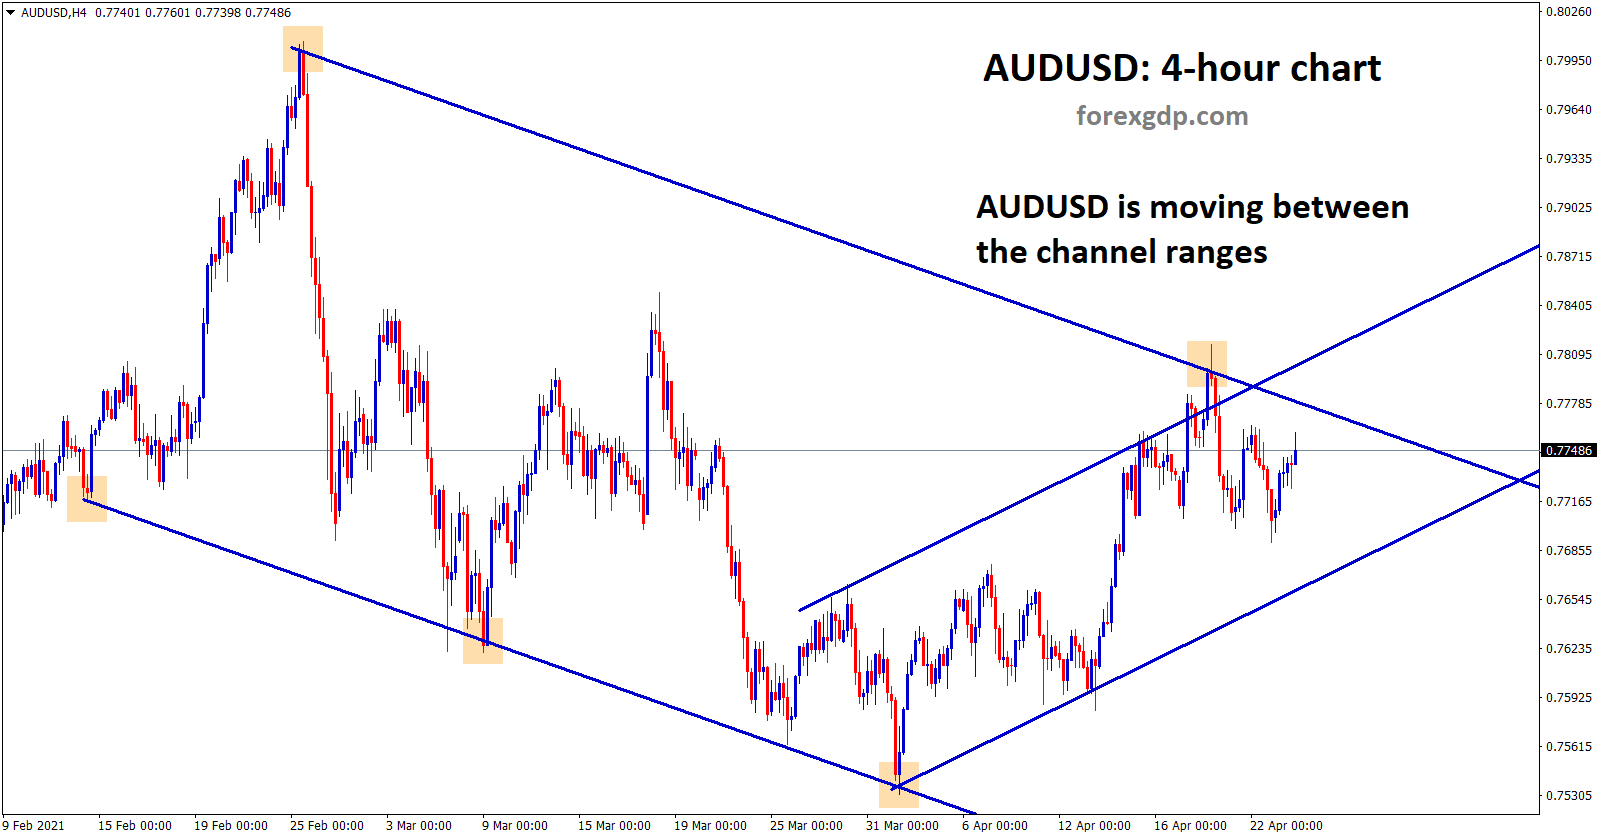 AUDUSD is moving between the channel ranges